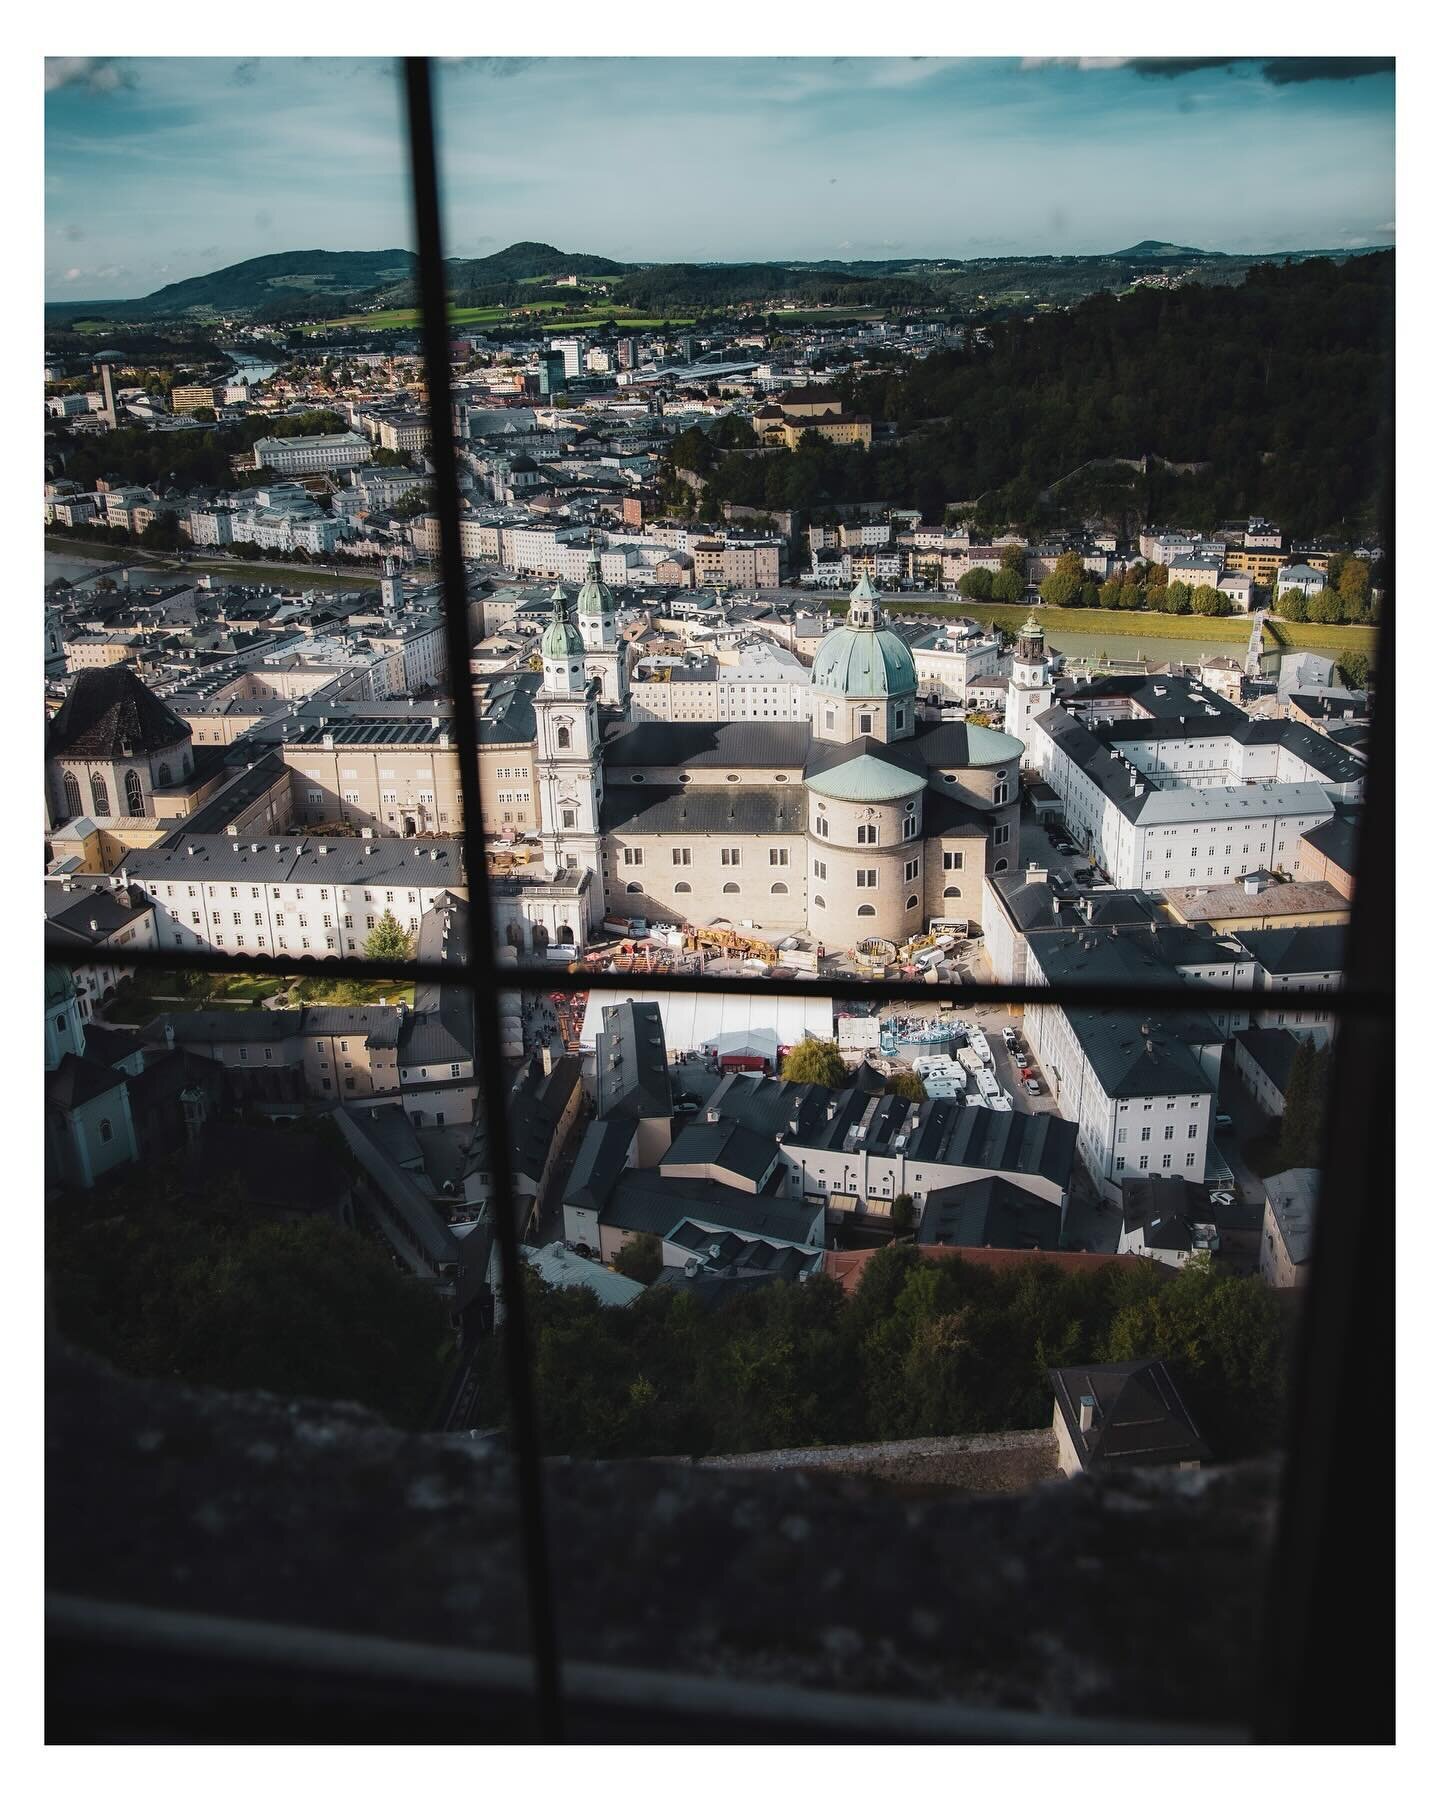 The sun-glowing cathedral in Salzburg, seen from one of the many windows of the Fortress Hohensalzburg.

The Salzburg Cathedral (German: Salzburger Dom) is the seventeenth-century Baroque cathedral of the Roman Catholic Archdiocese of Salzburg in the